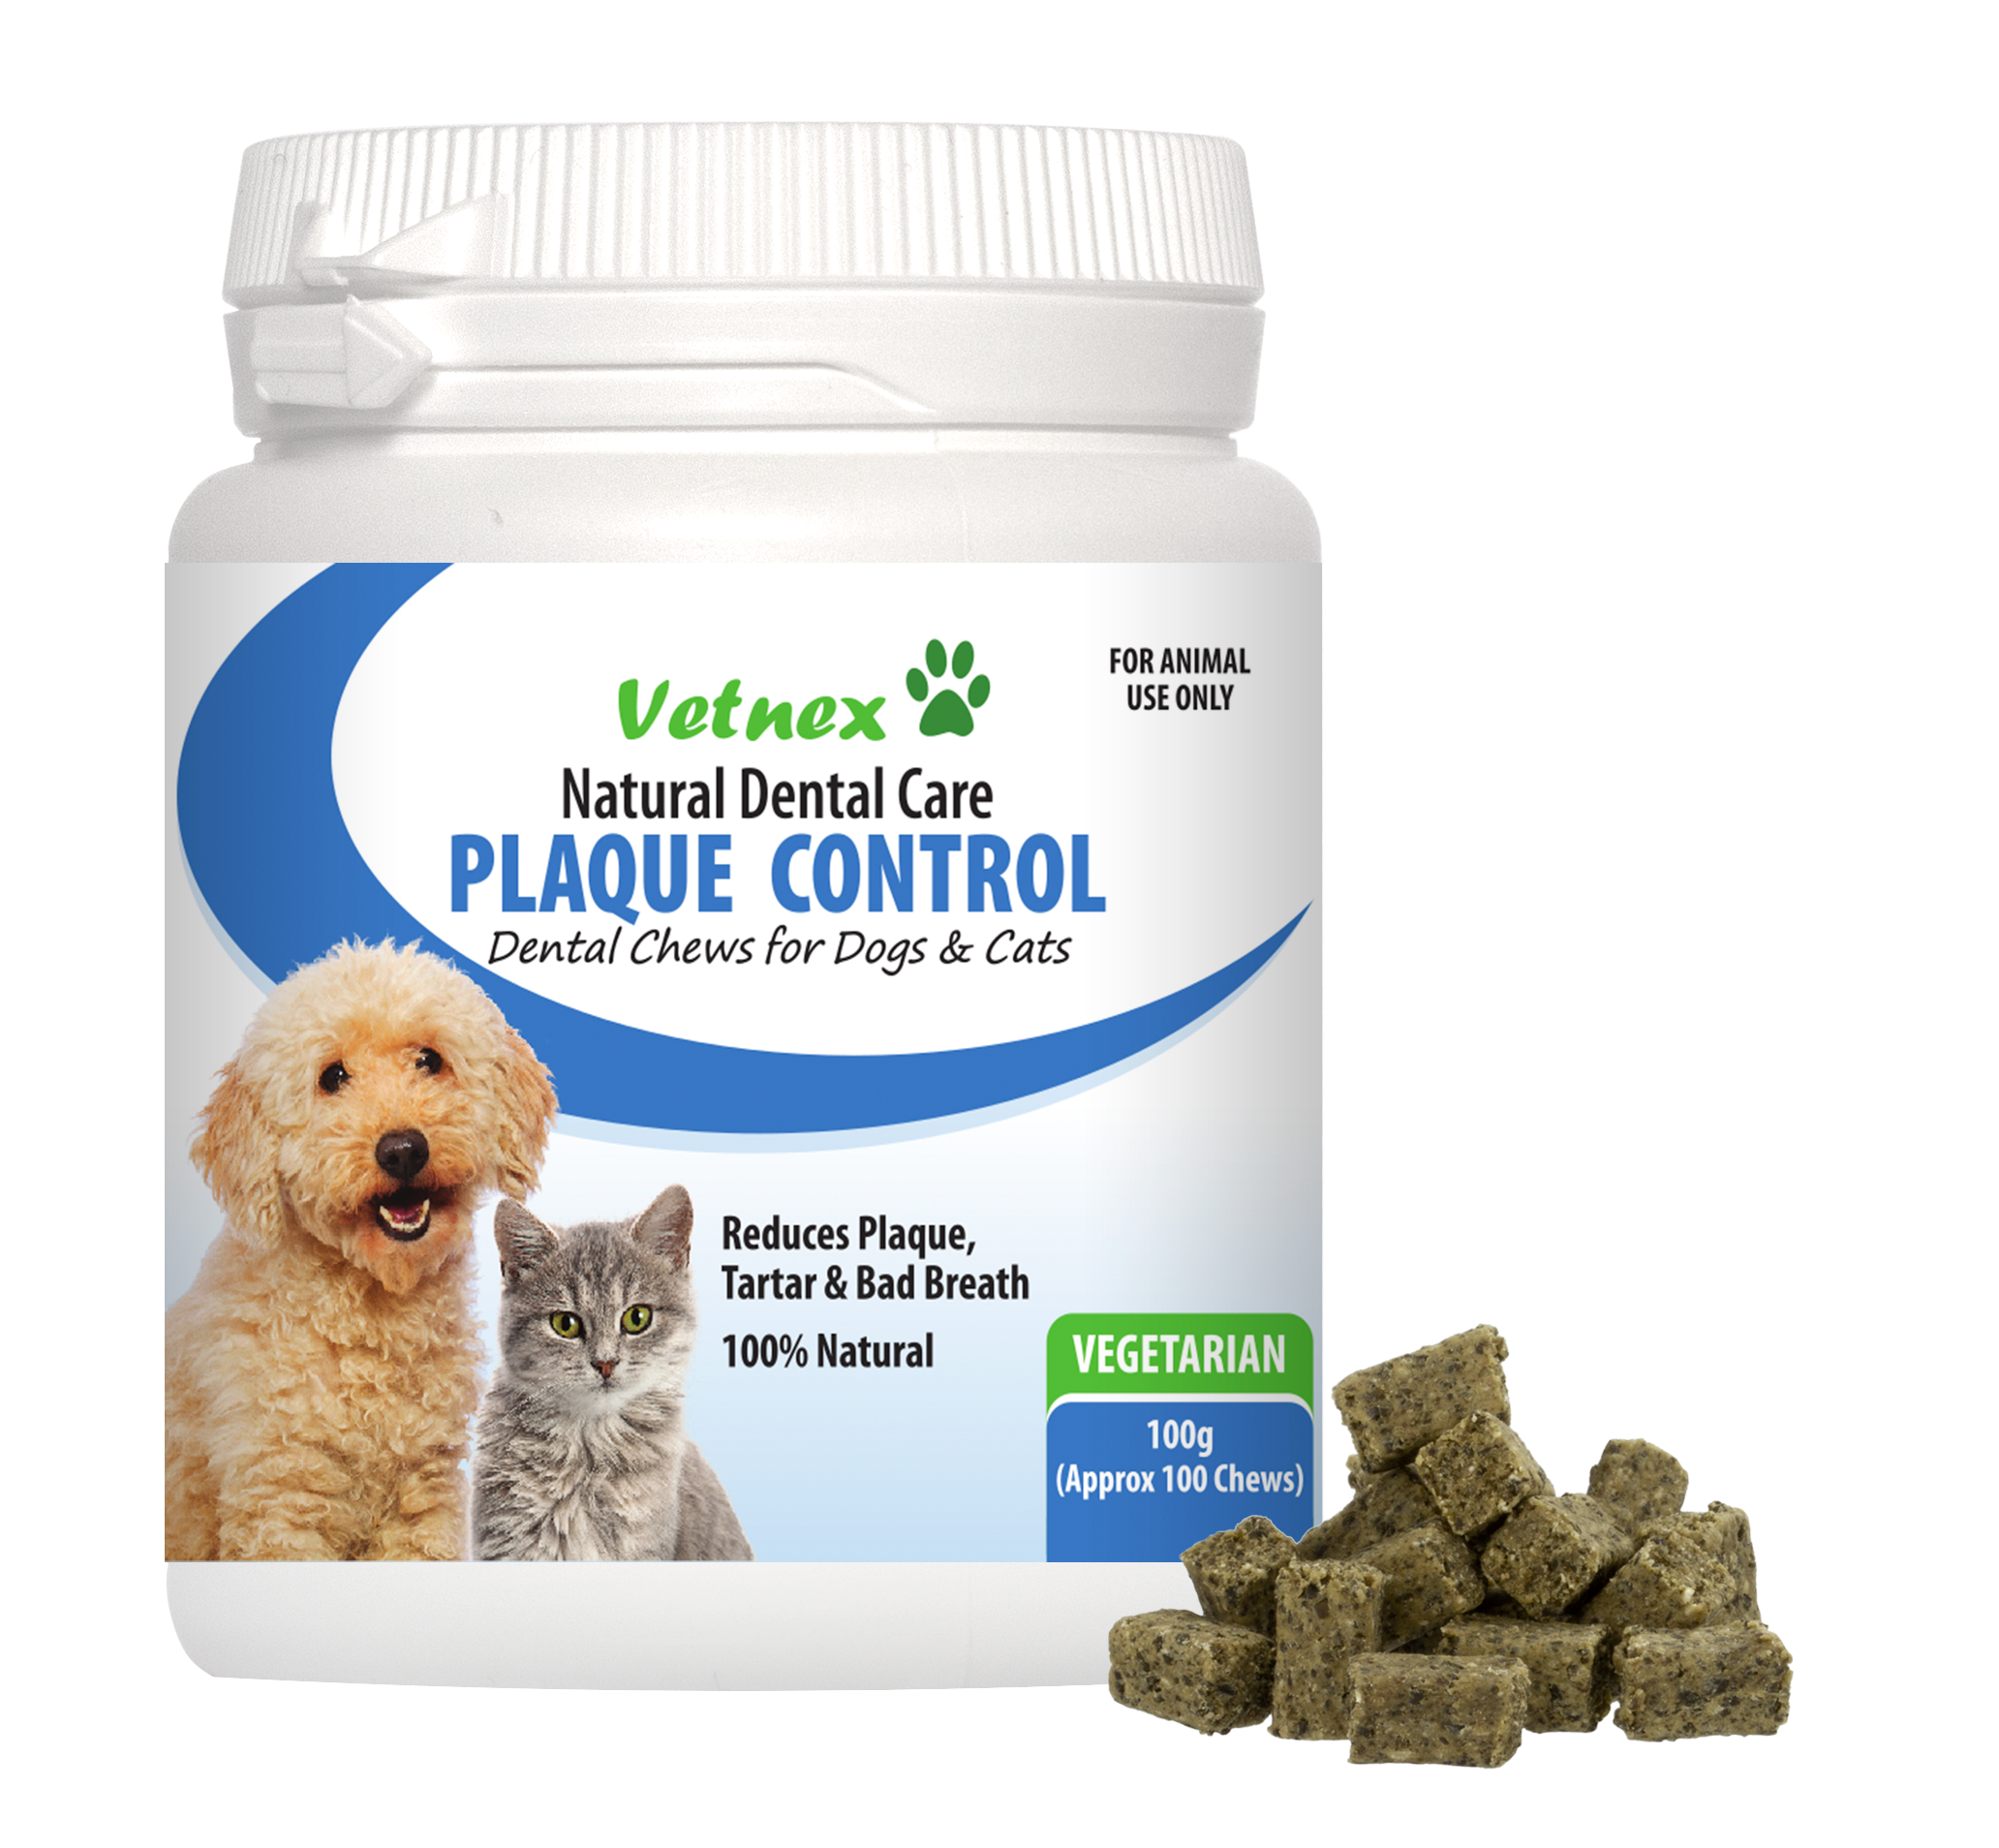 Vetnex Is Launching a New Vegetarian Chew to the Plaque Control Natural Dental Care Range